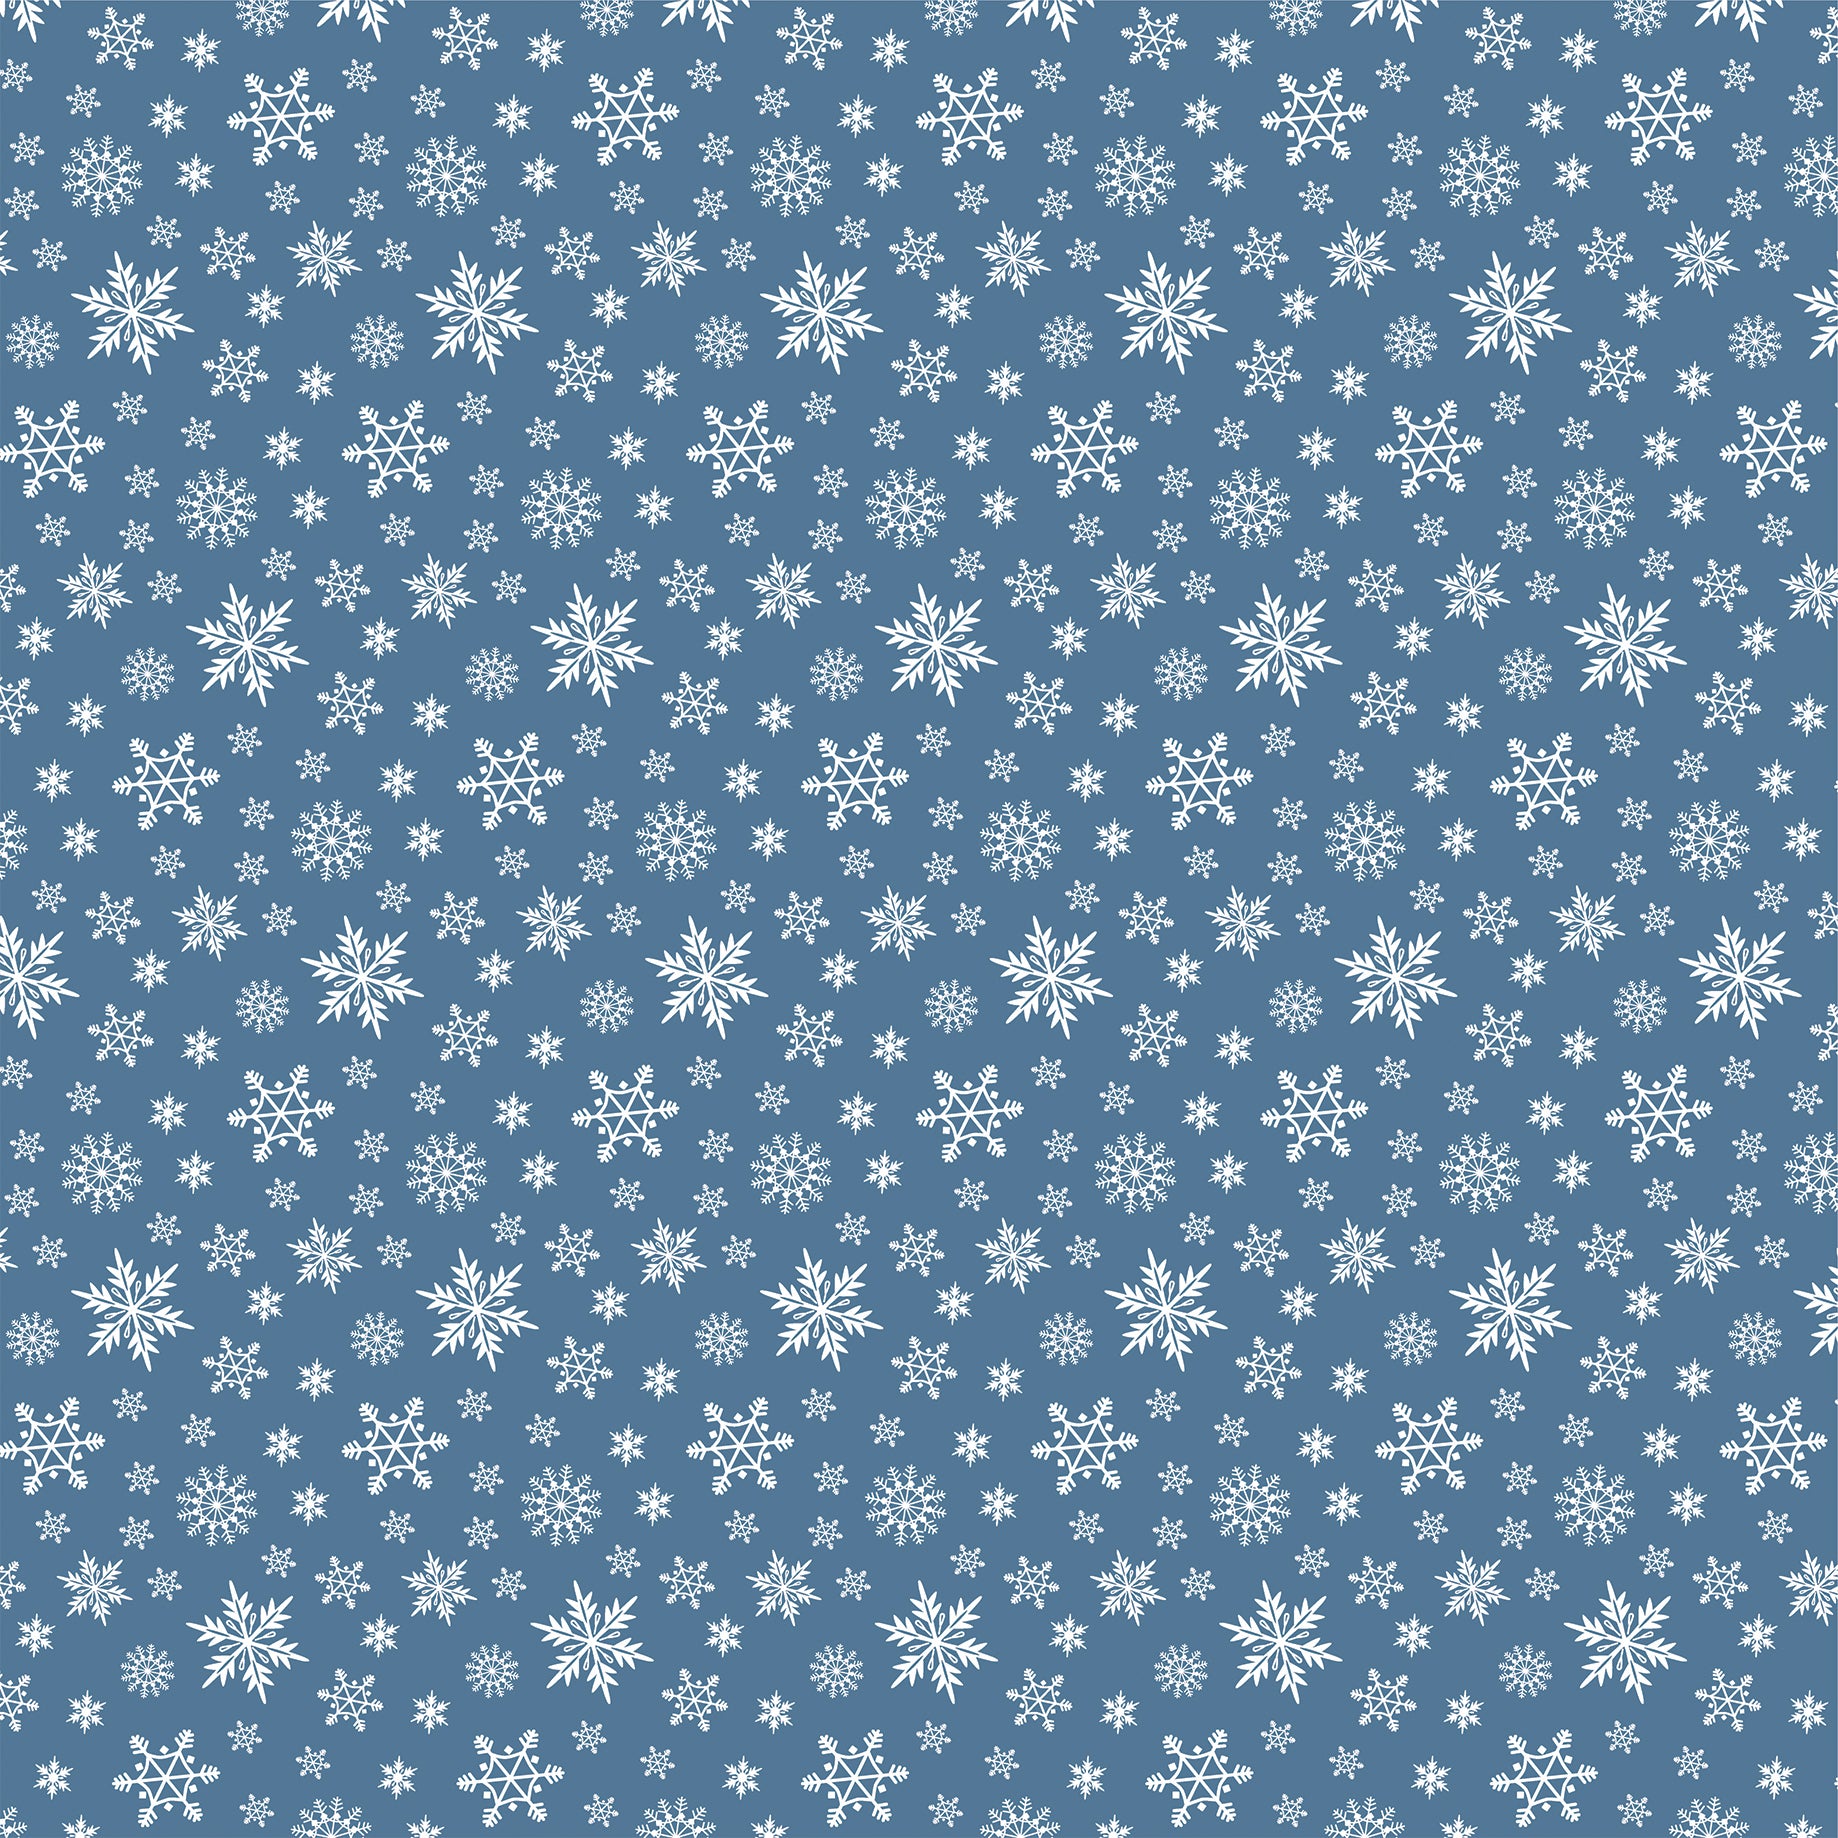 Wintertime Collection Sledding Fun 12 x 12 Double-Sided Scrapbook Paper by Carta Bella